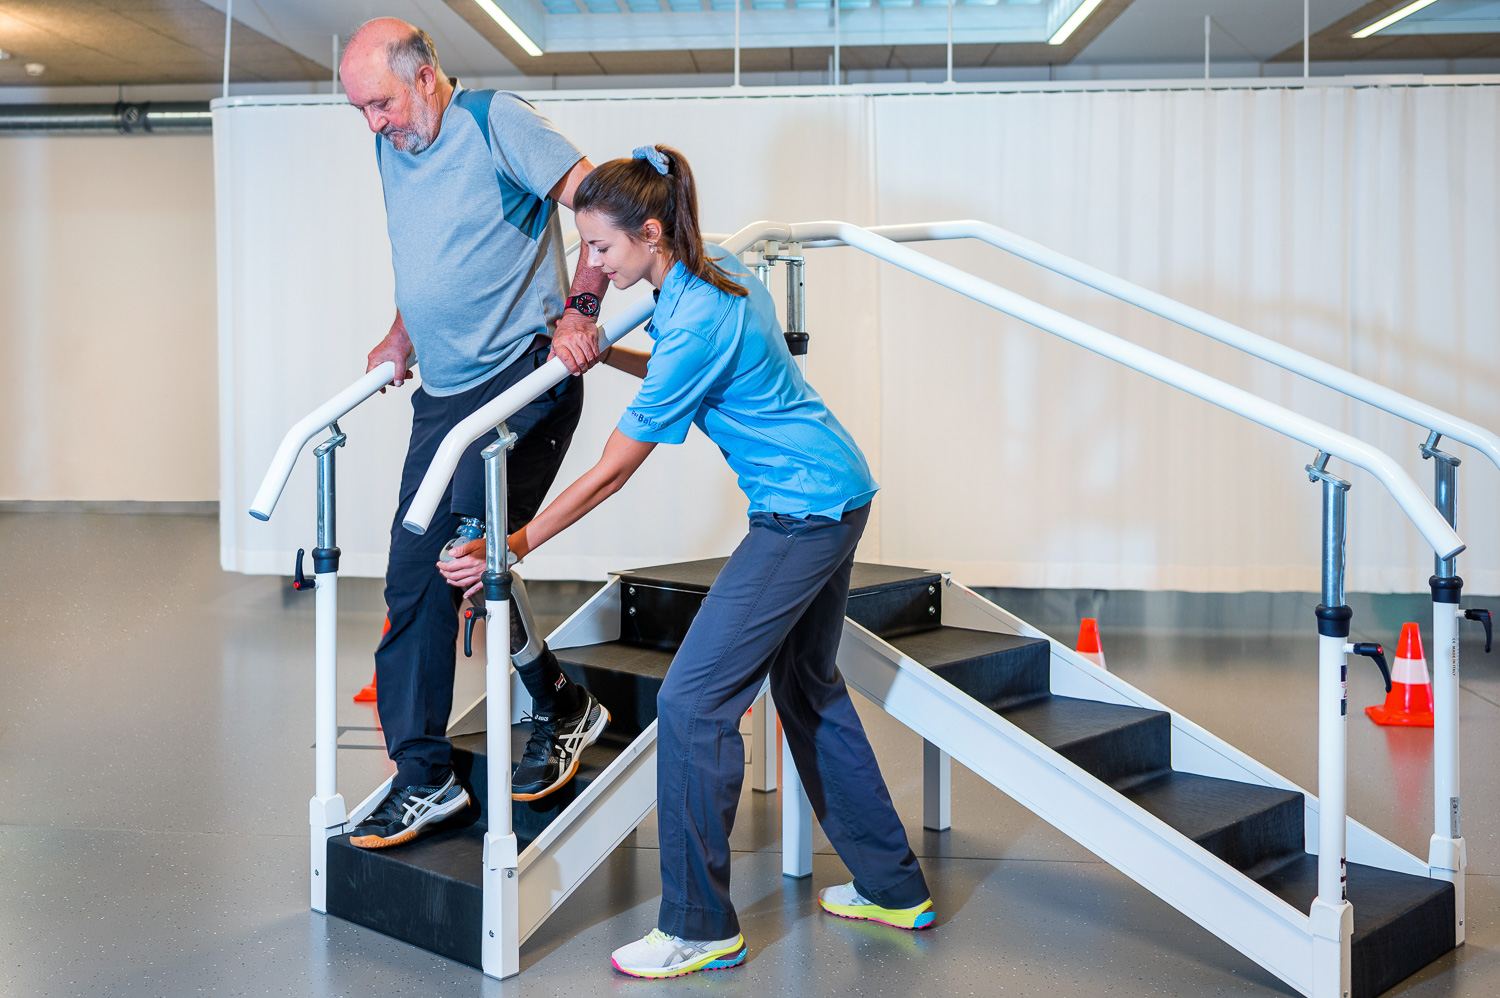 Patient with a transfemoral amputation on the left leg runs down a staircase set up for exercise purposes with the help of the physiotherapist.